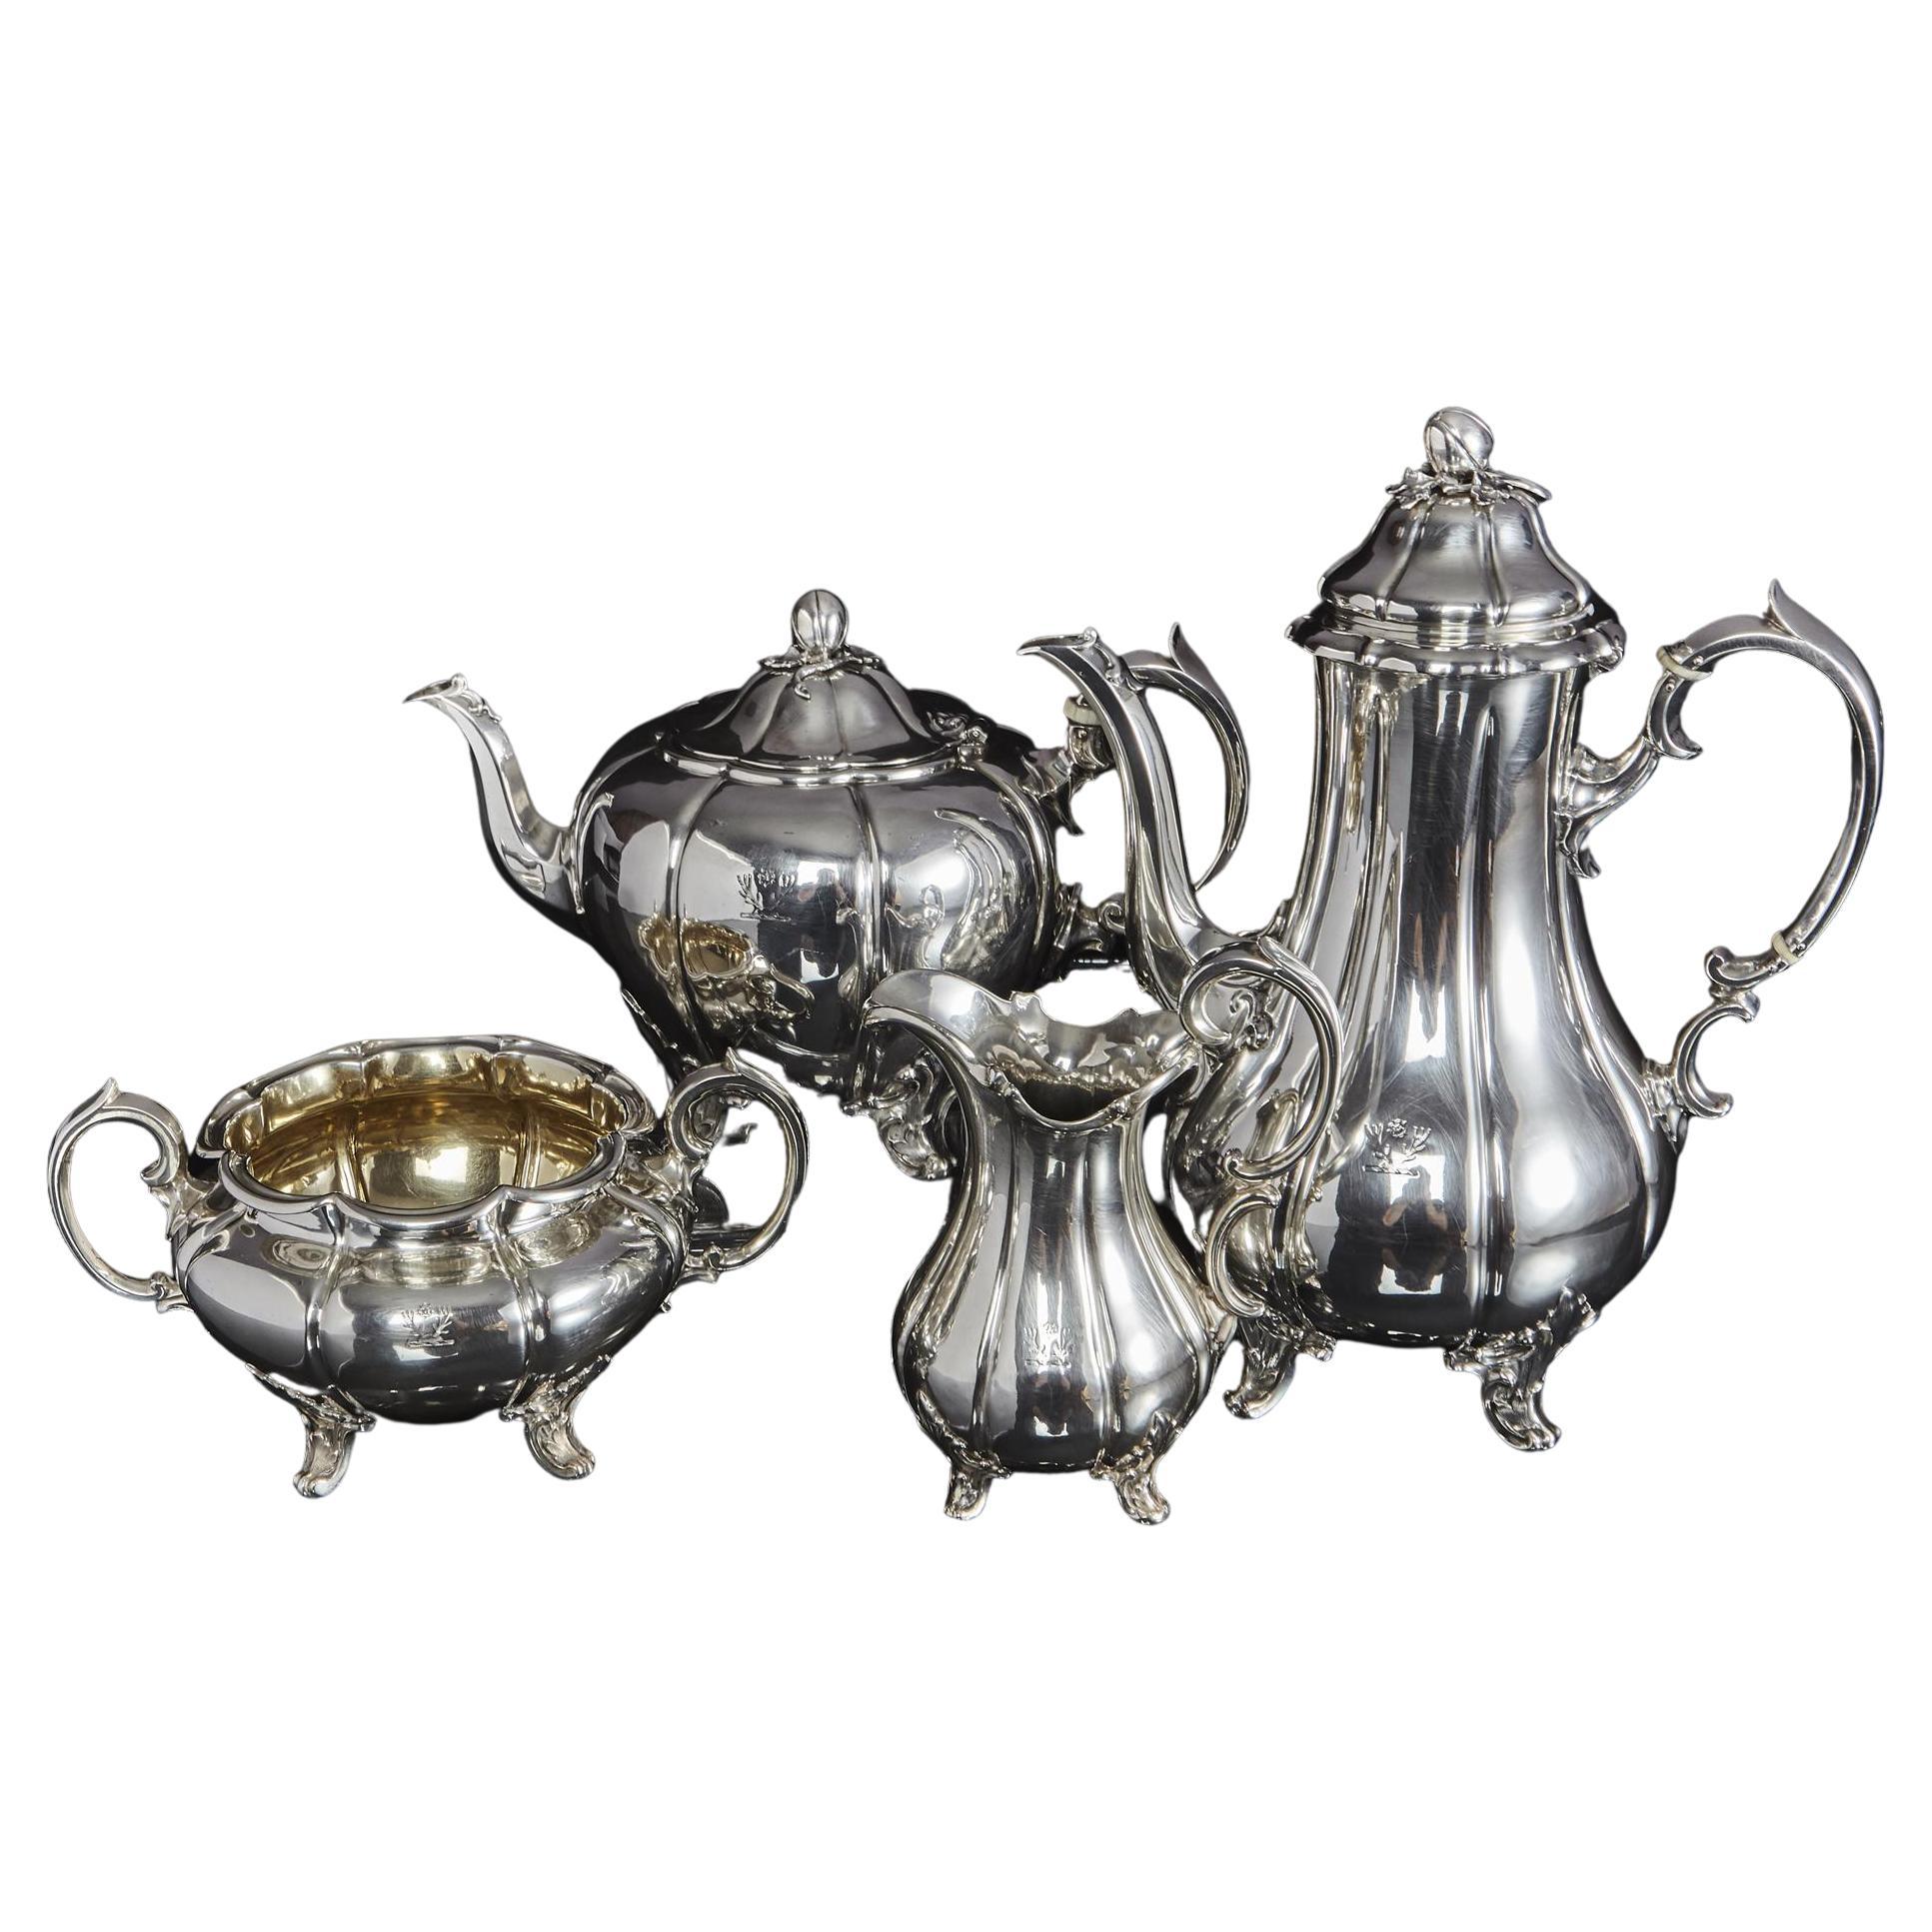 Four Piece Melon Style Silver Tea and Coffee Set